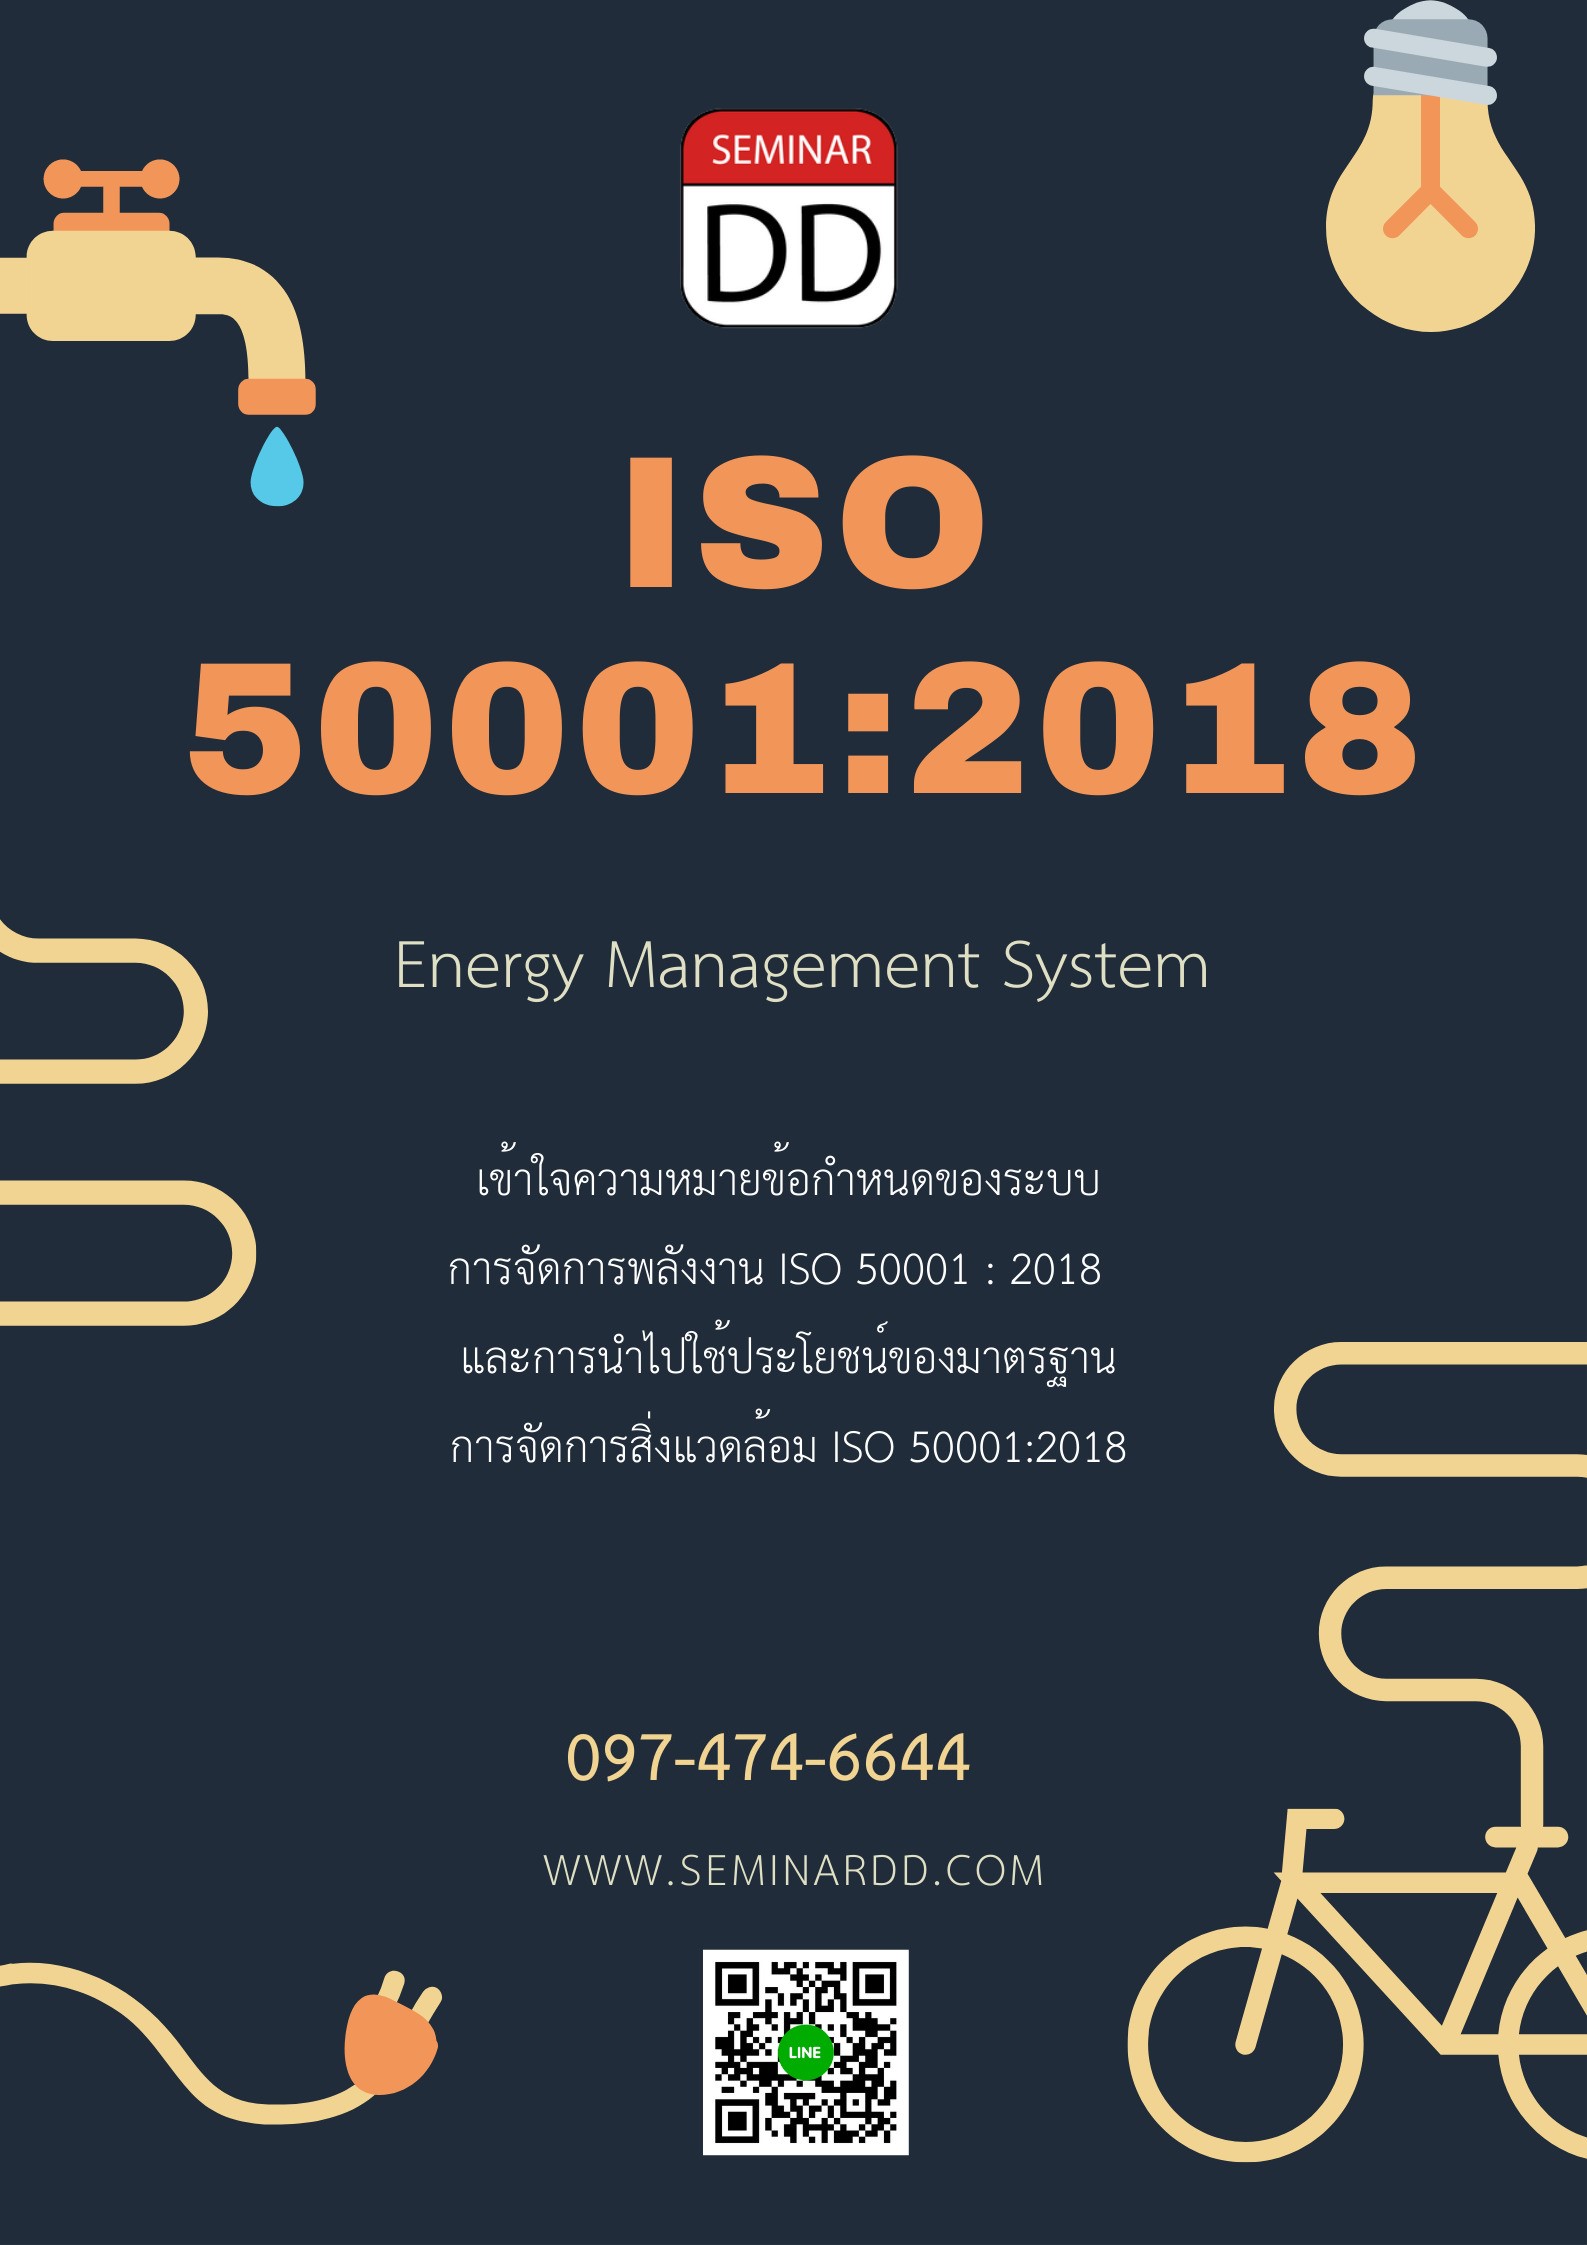 ISO 50001:2018 Energy Management System-Requirement